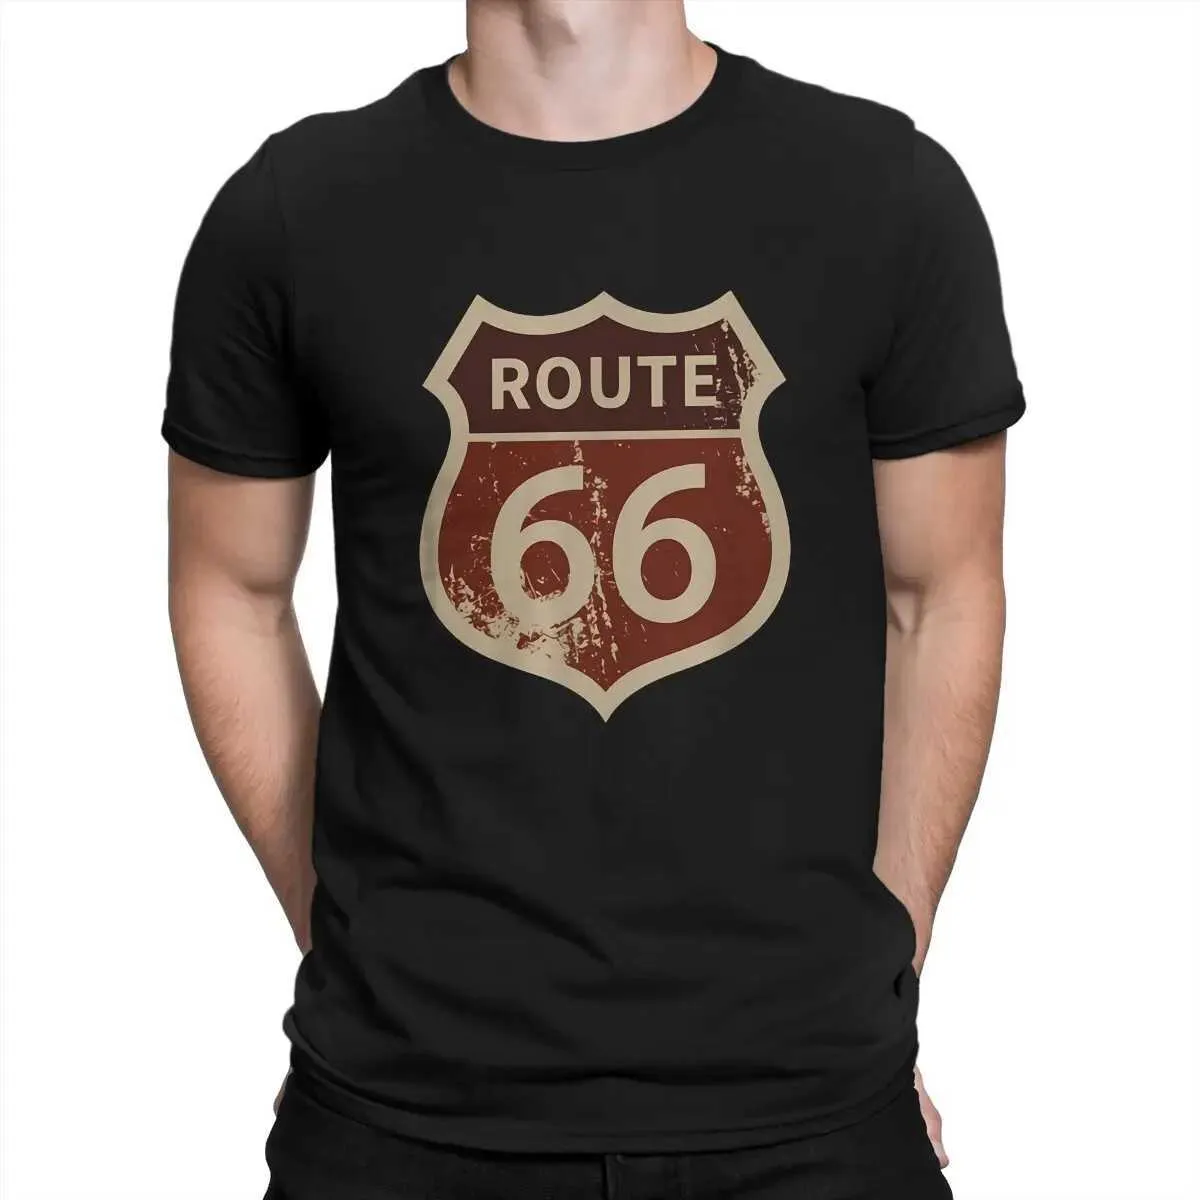 Herr t-shirts u s Route 66 Brown Sign Tshirt Homme Mens Tees Polyester T Shirt for Men T240425